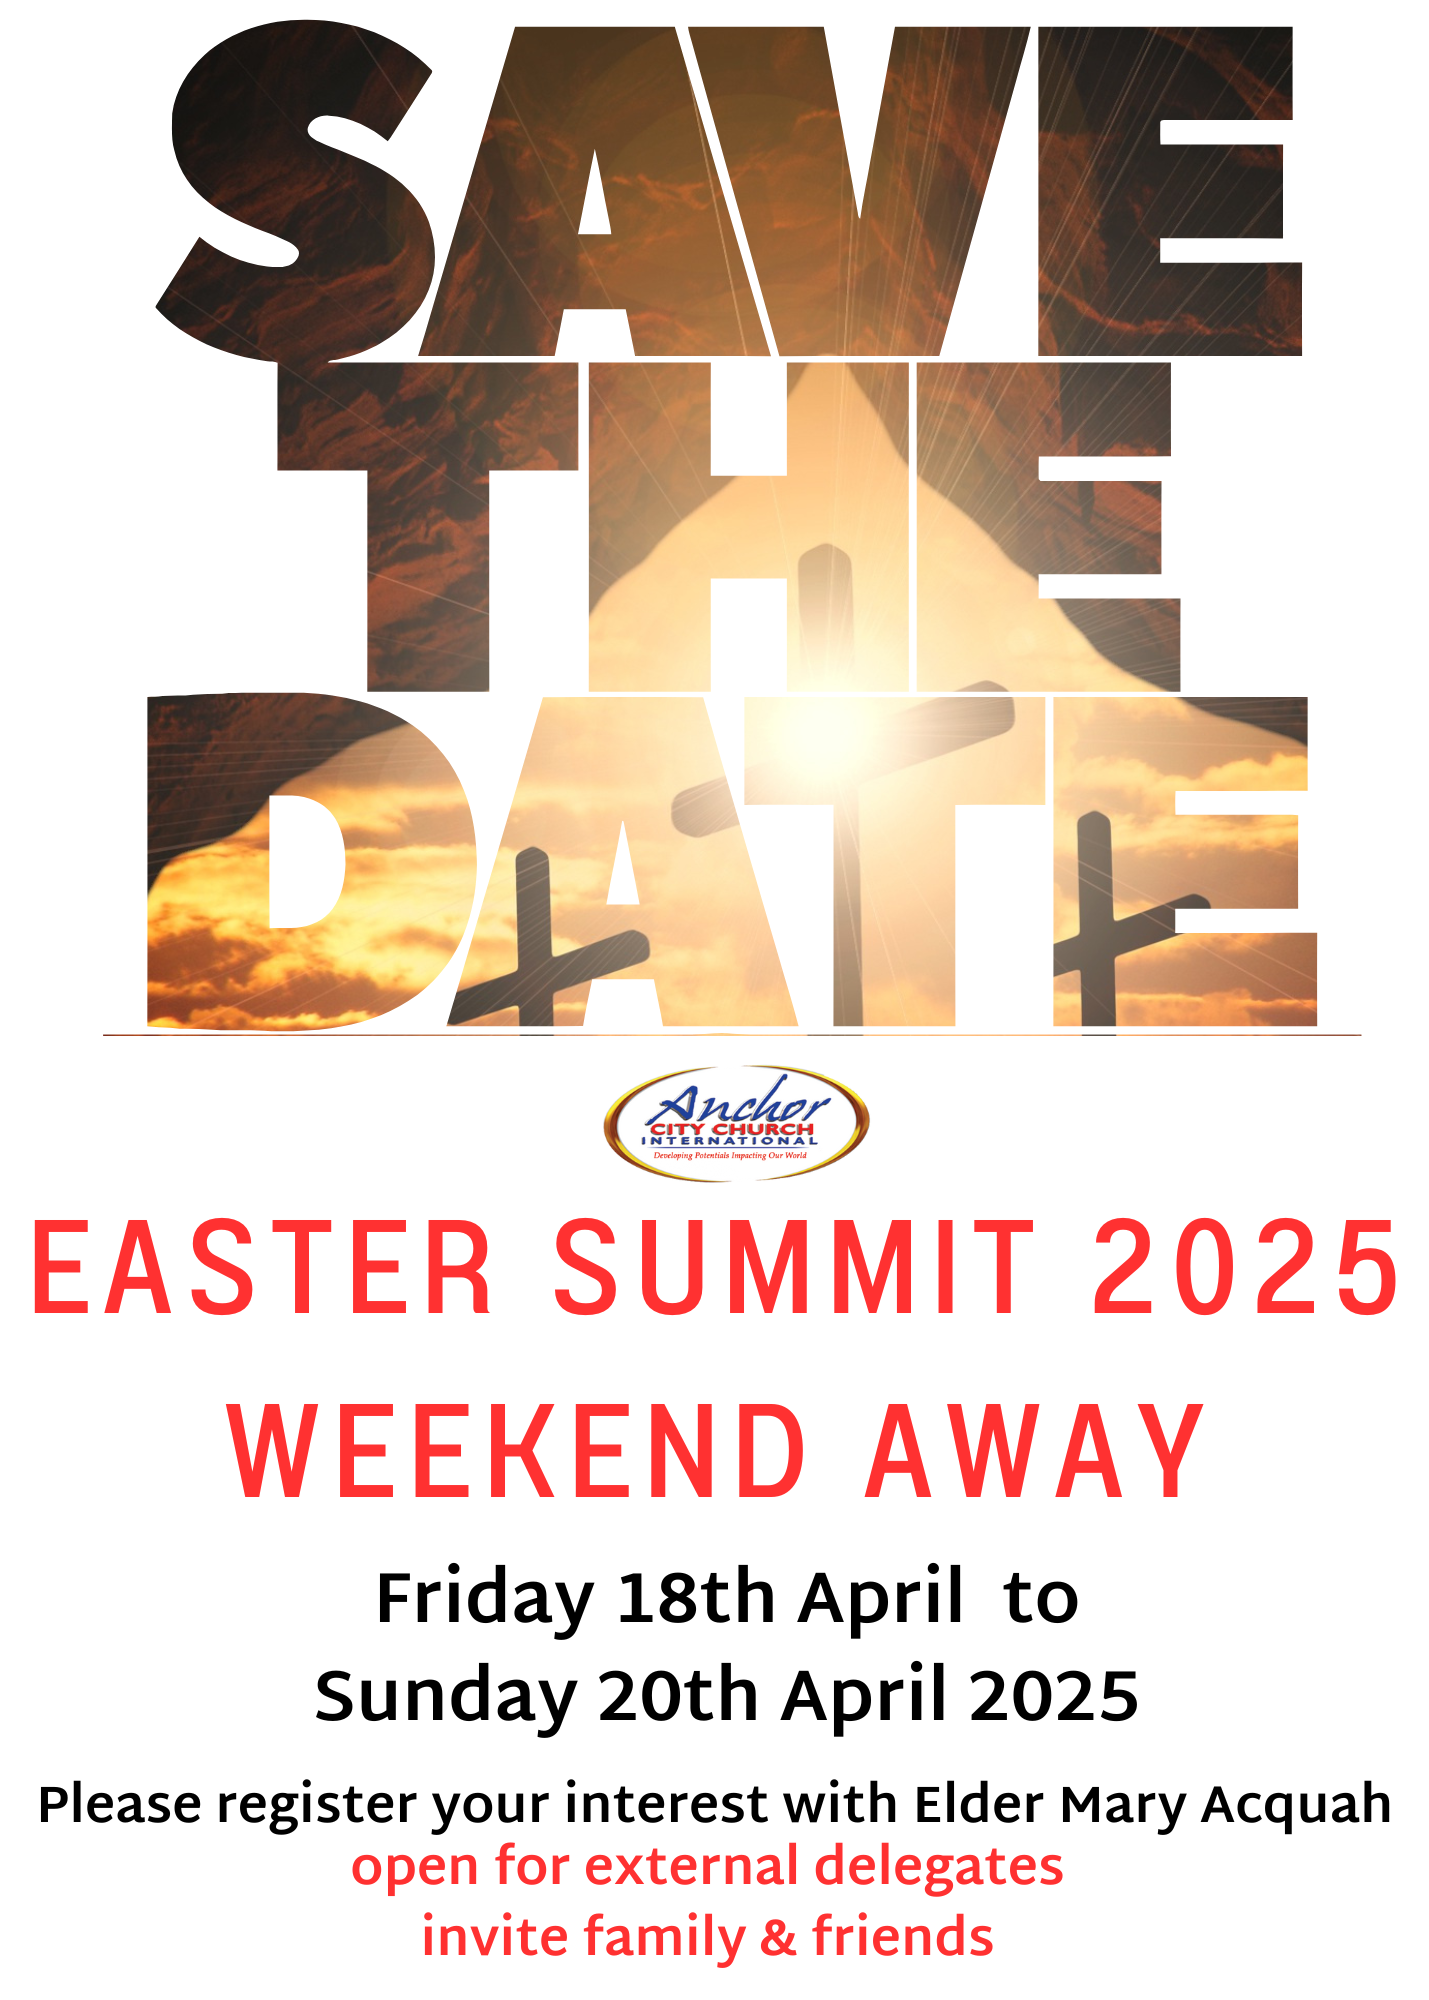 Easter Summit - Save the date